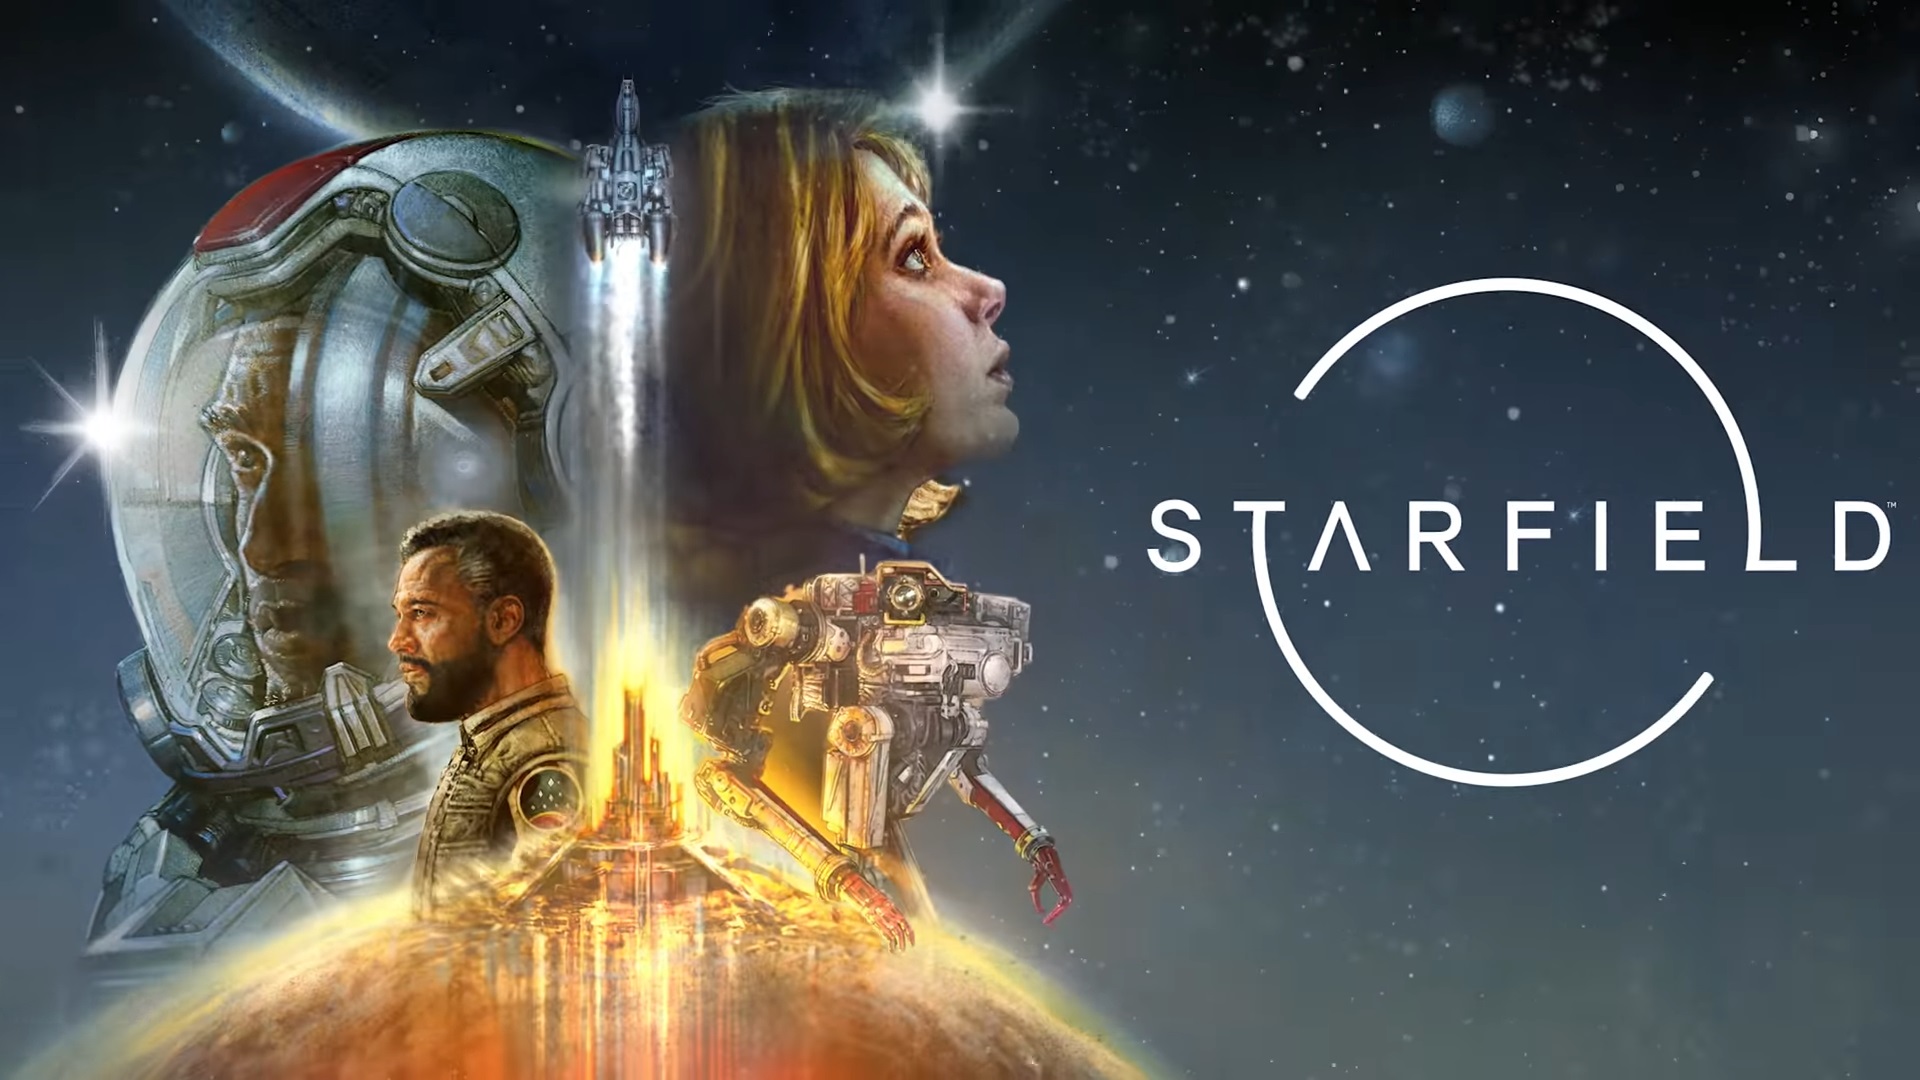 Starfield: Journey to the Stars in Bethesda's Ambitious Space Epic